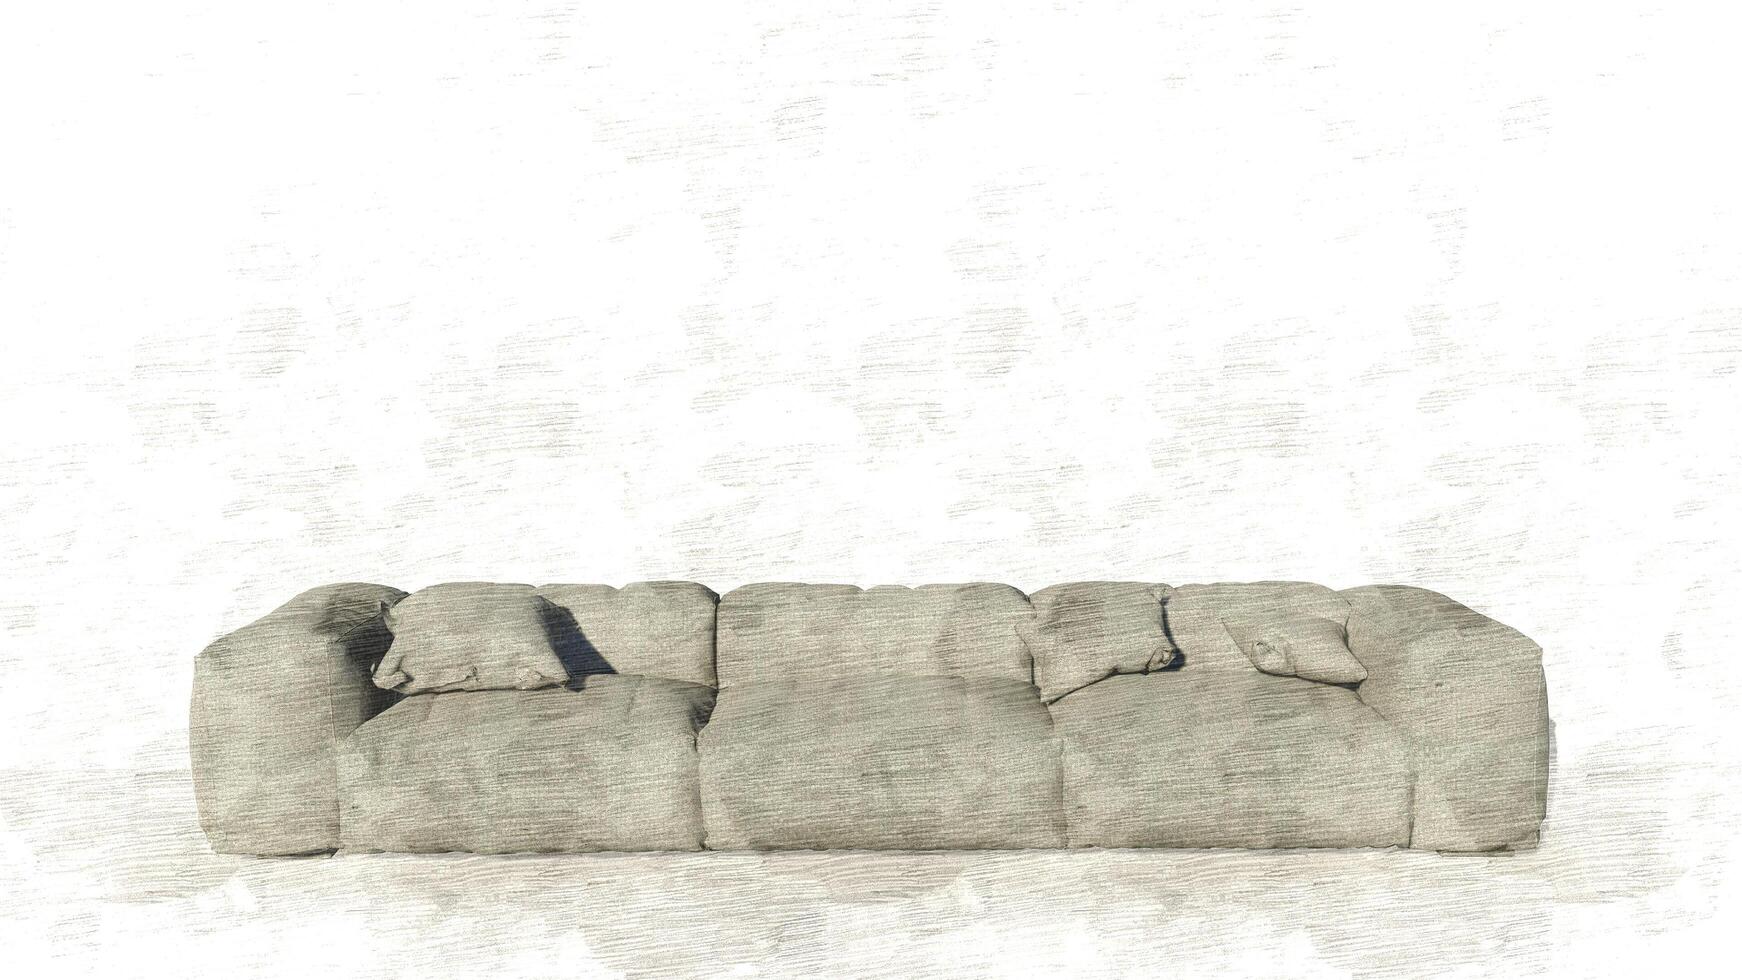 3d rendering of a modern sofa photo